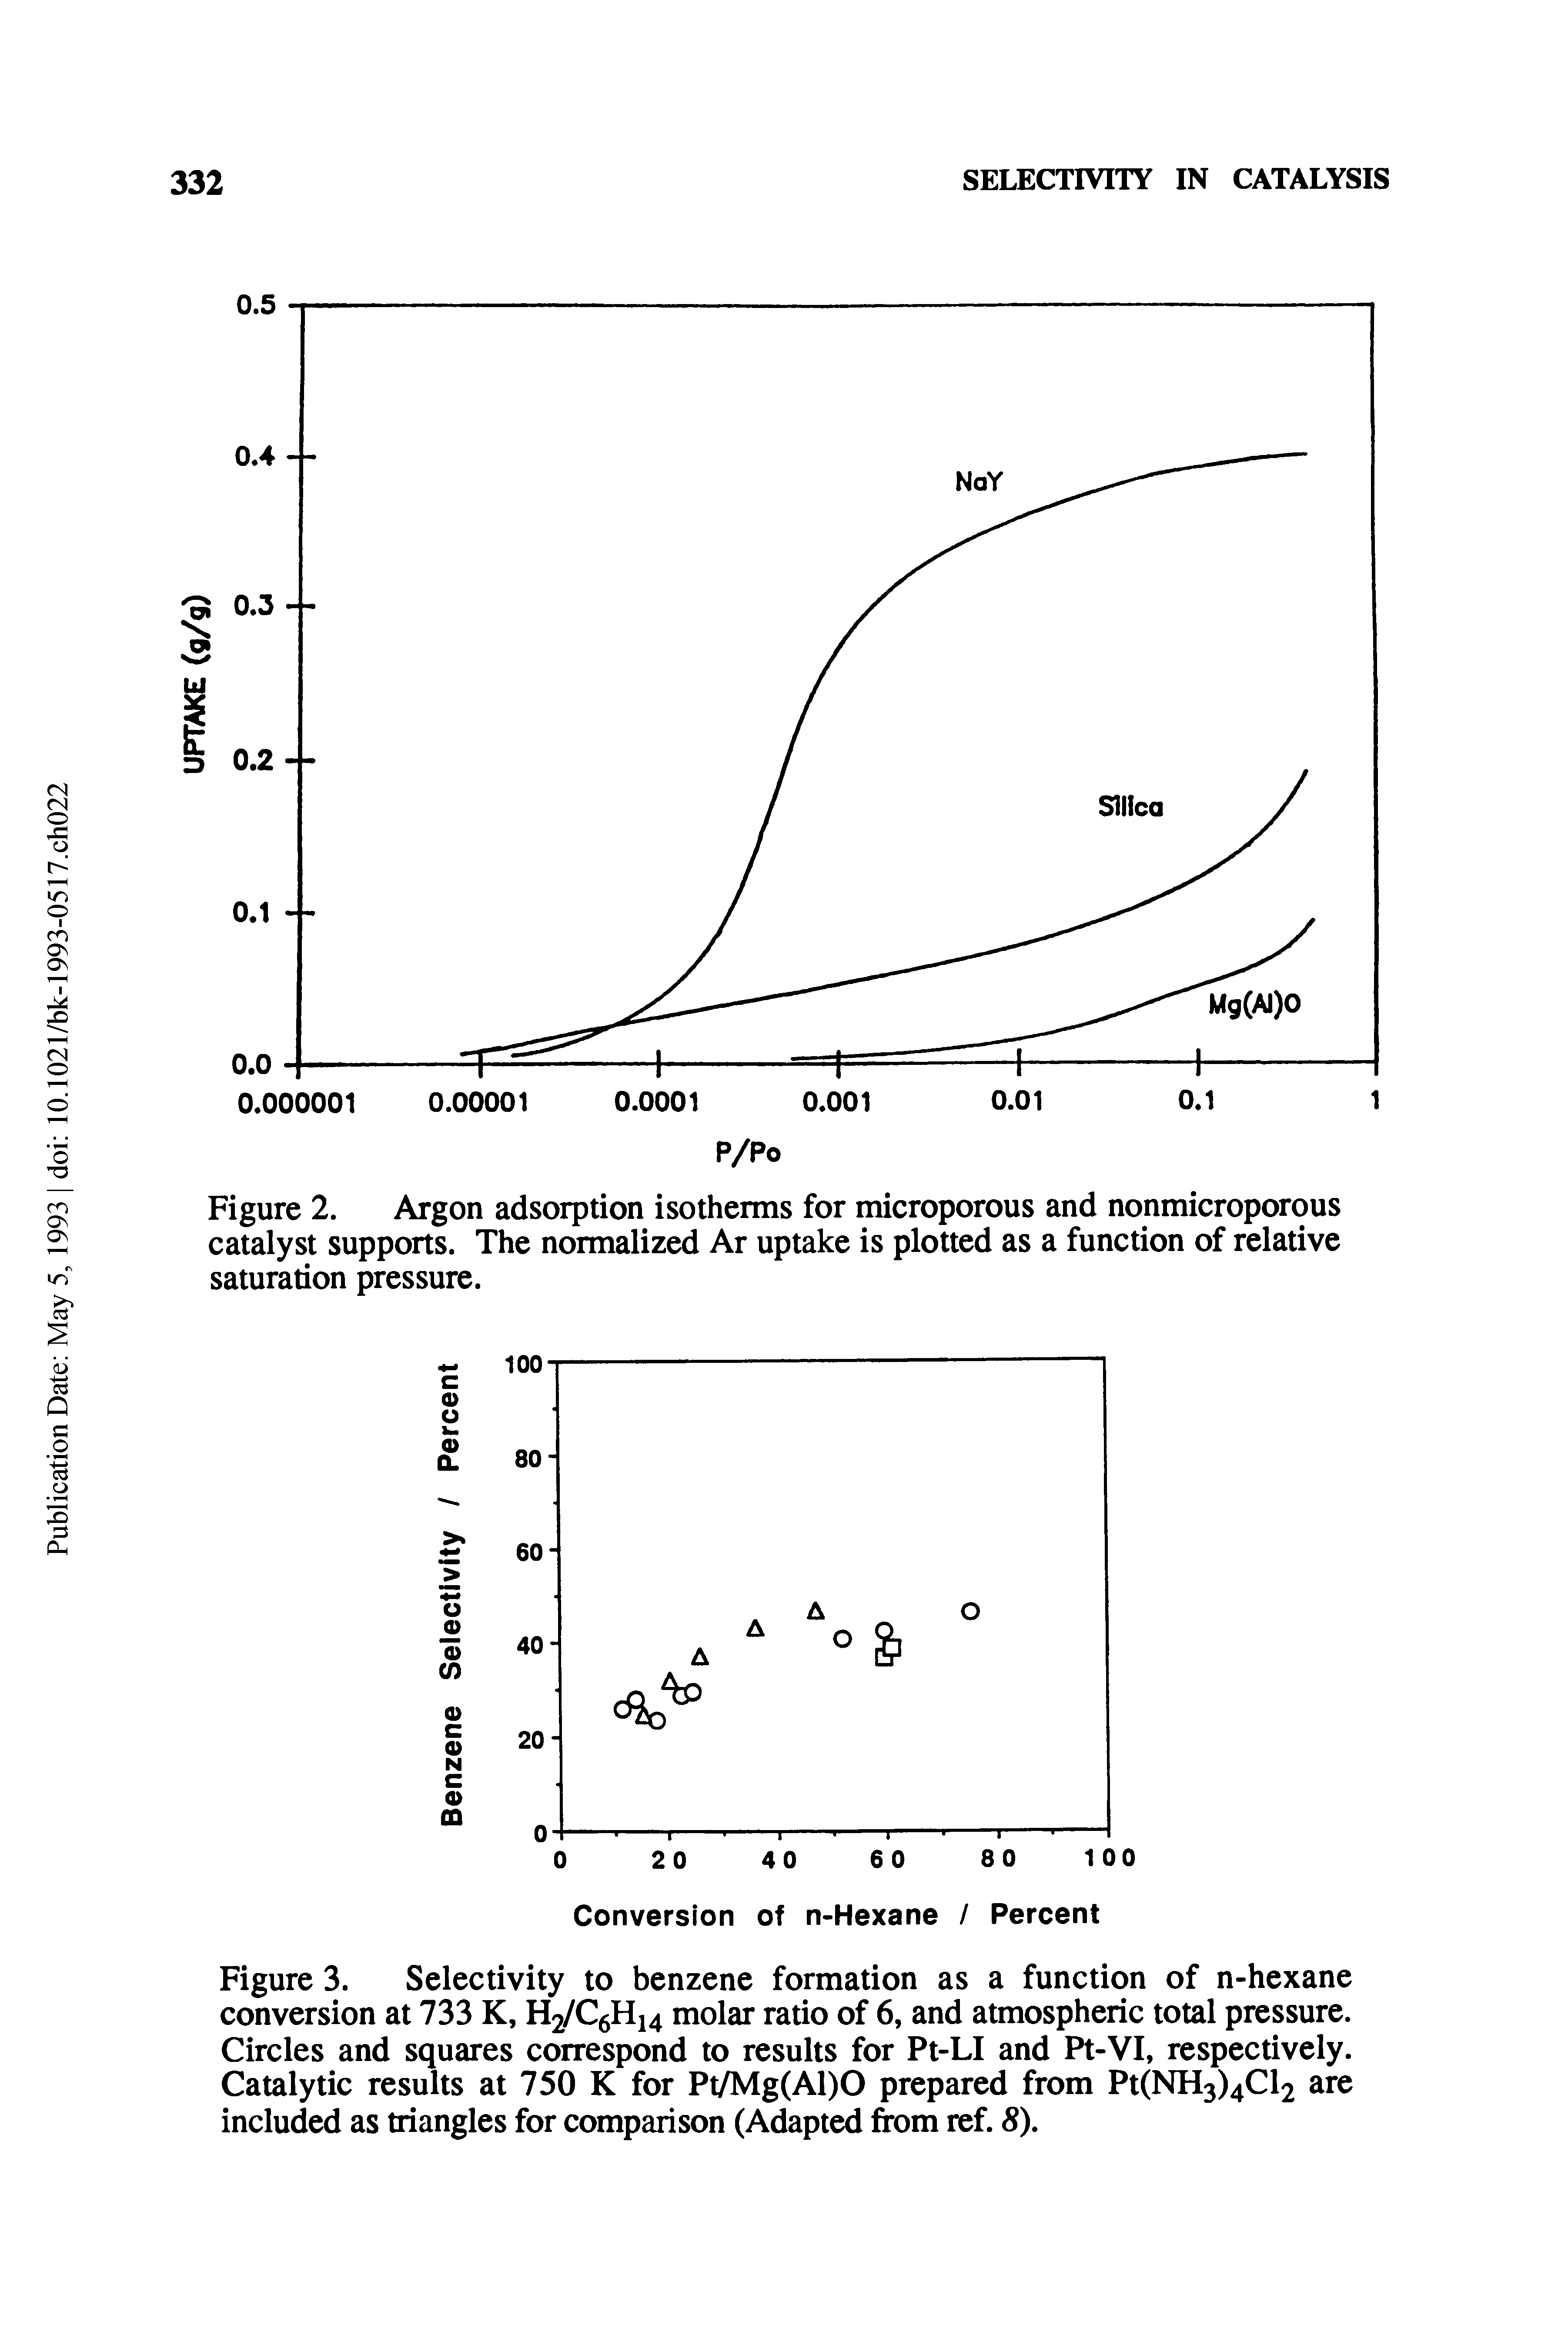 Figure 2. Argon adsorption isotherms for microporous and nonmicroporous catalyst supports. The normalized Ar uptake is plotted as a function of relative saturation pressure.